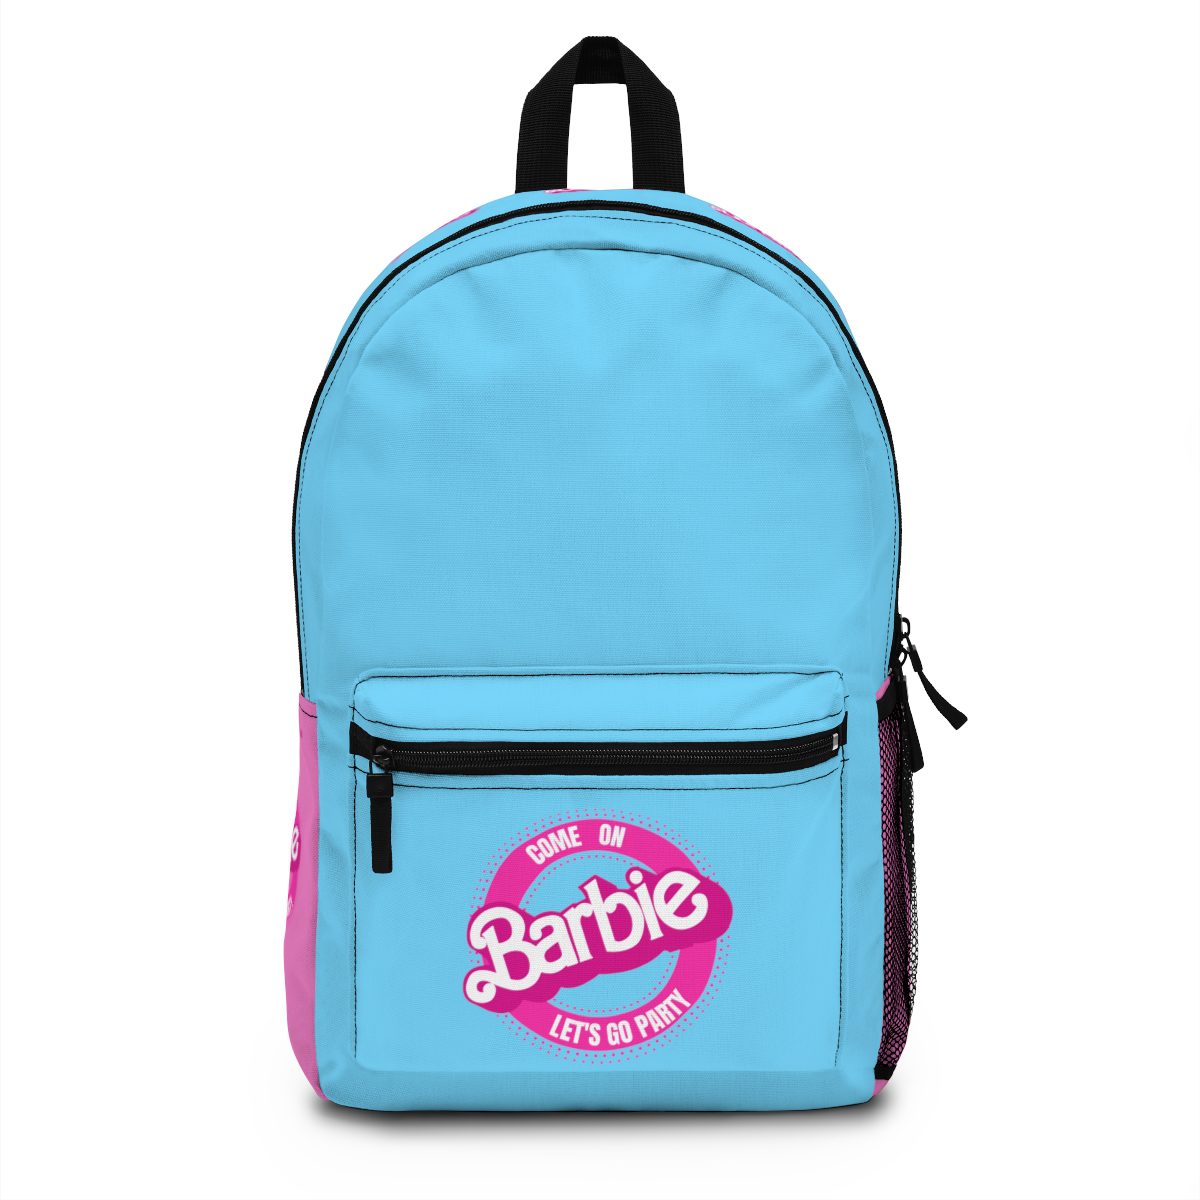 Sky Blue and Pink Barbie Backpack with Circular Logo Cool Kiddo 10